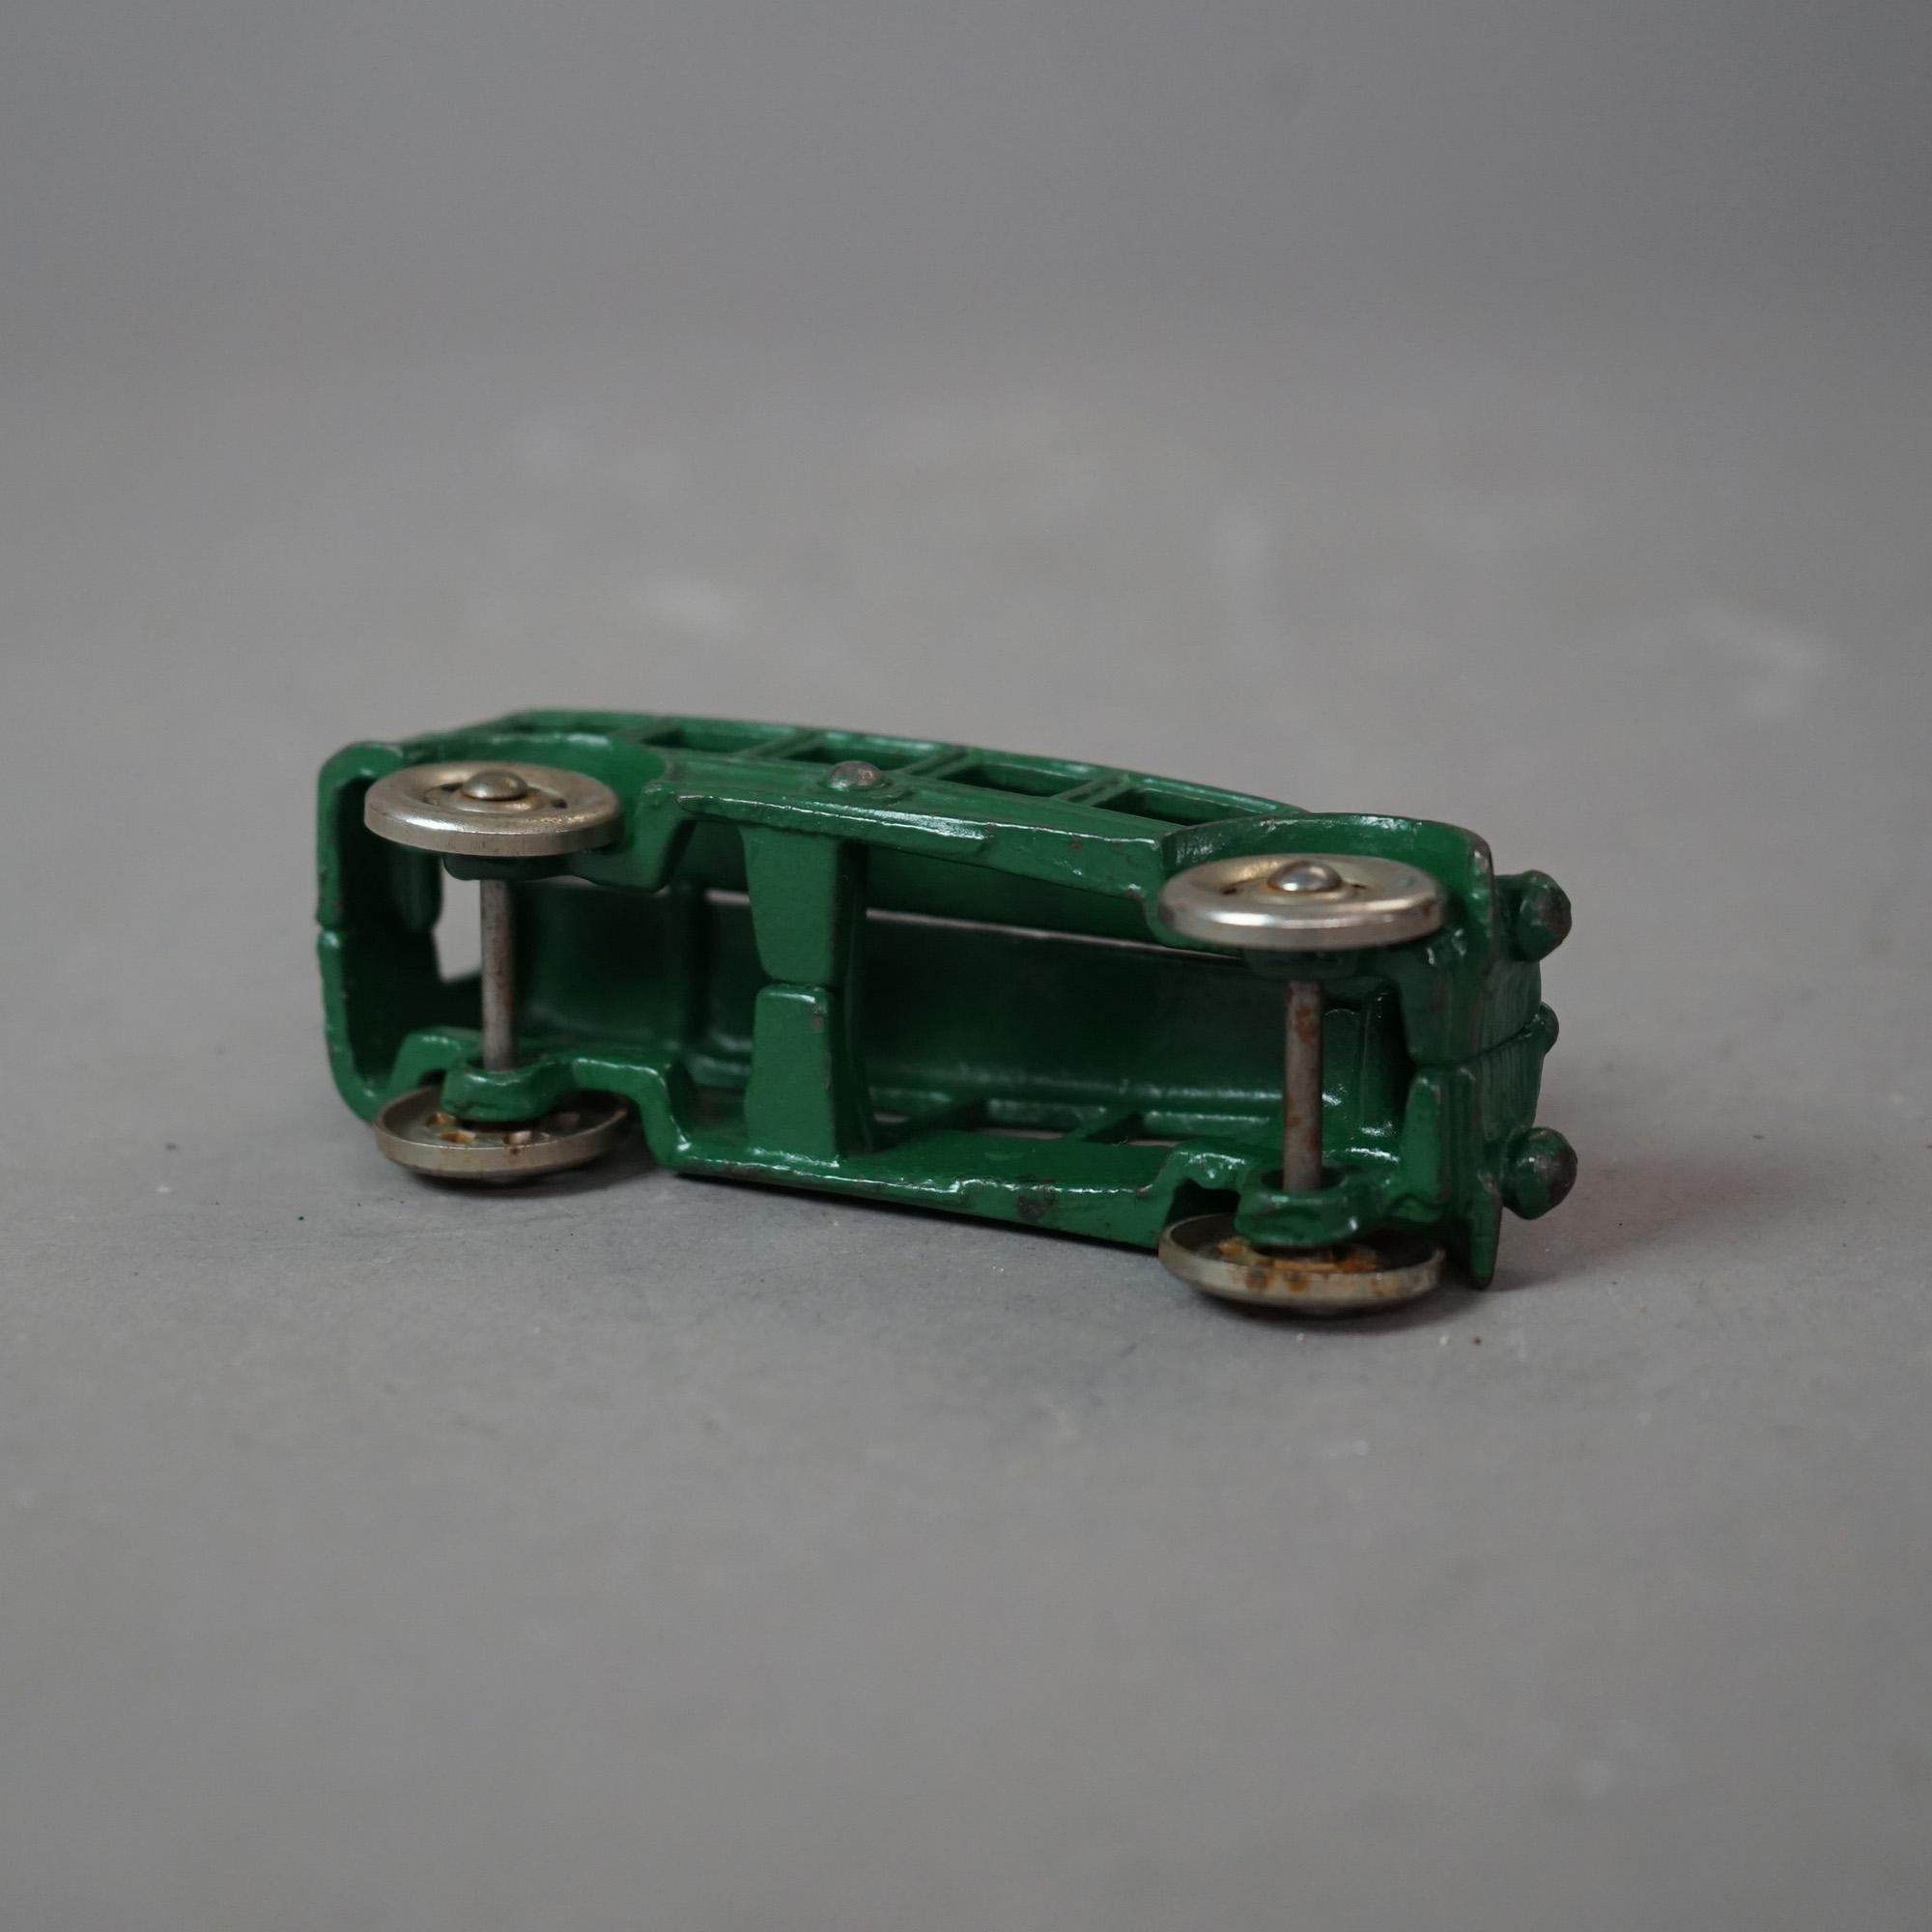 Antique Hurley Green Painted Cast Iron Toy Bus Circa 1930 4